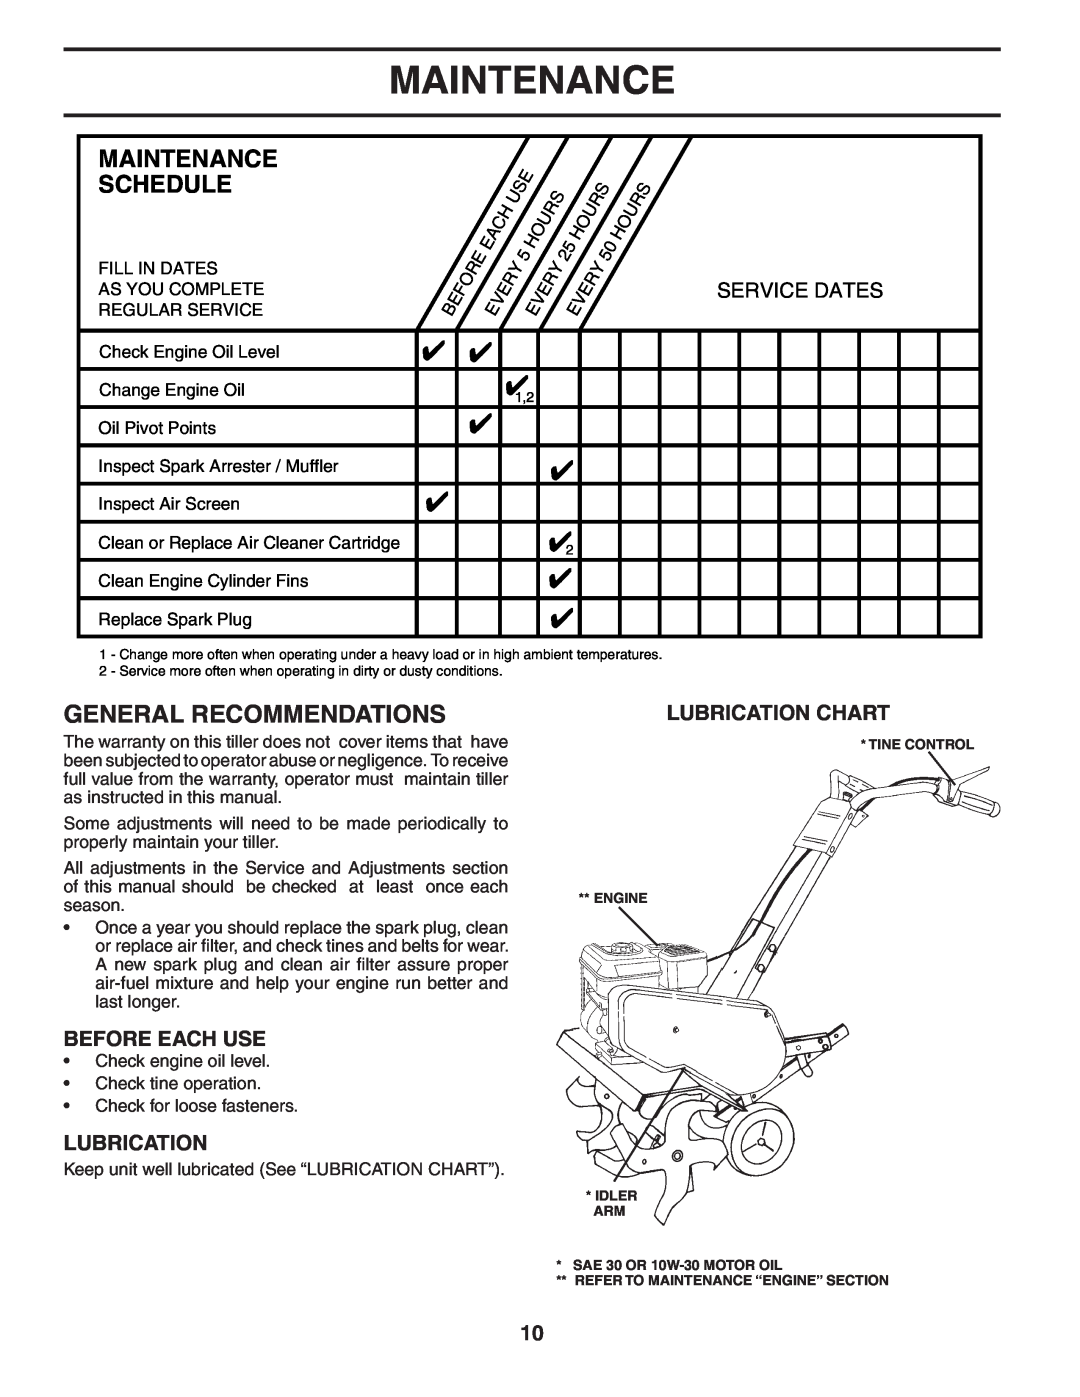 Poulan HDF550L General Recommendations, Before Each Use, Lubrication Chart, Maintenance Schedule, Service Dates 